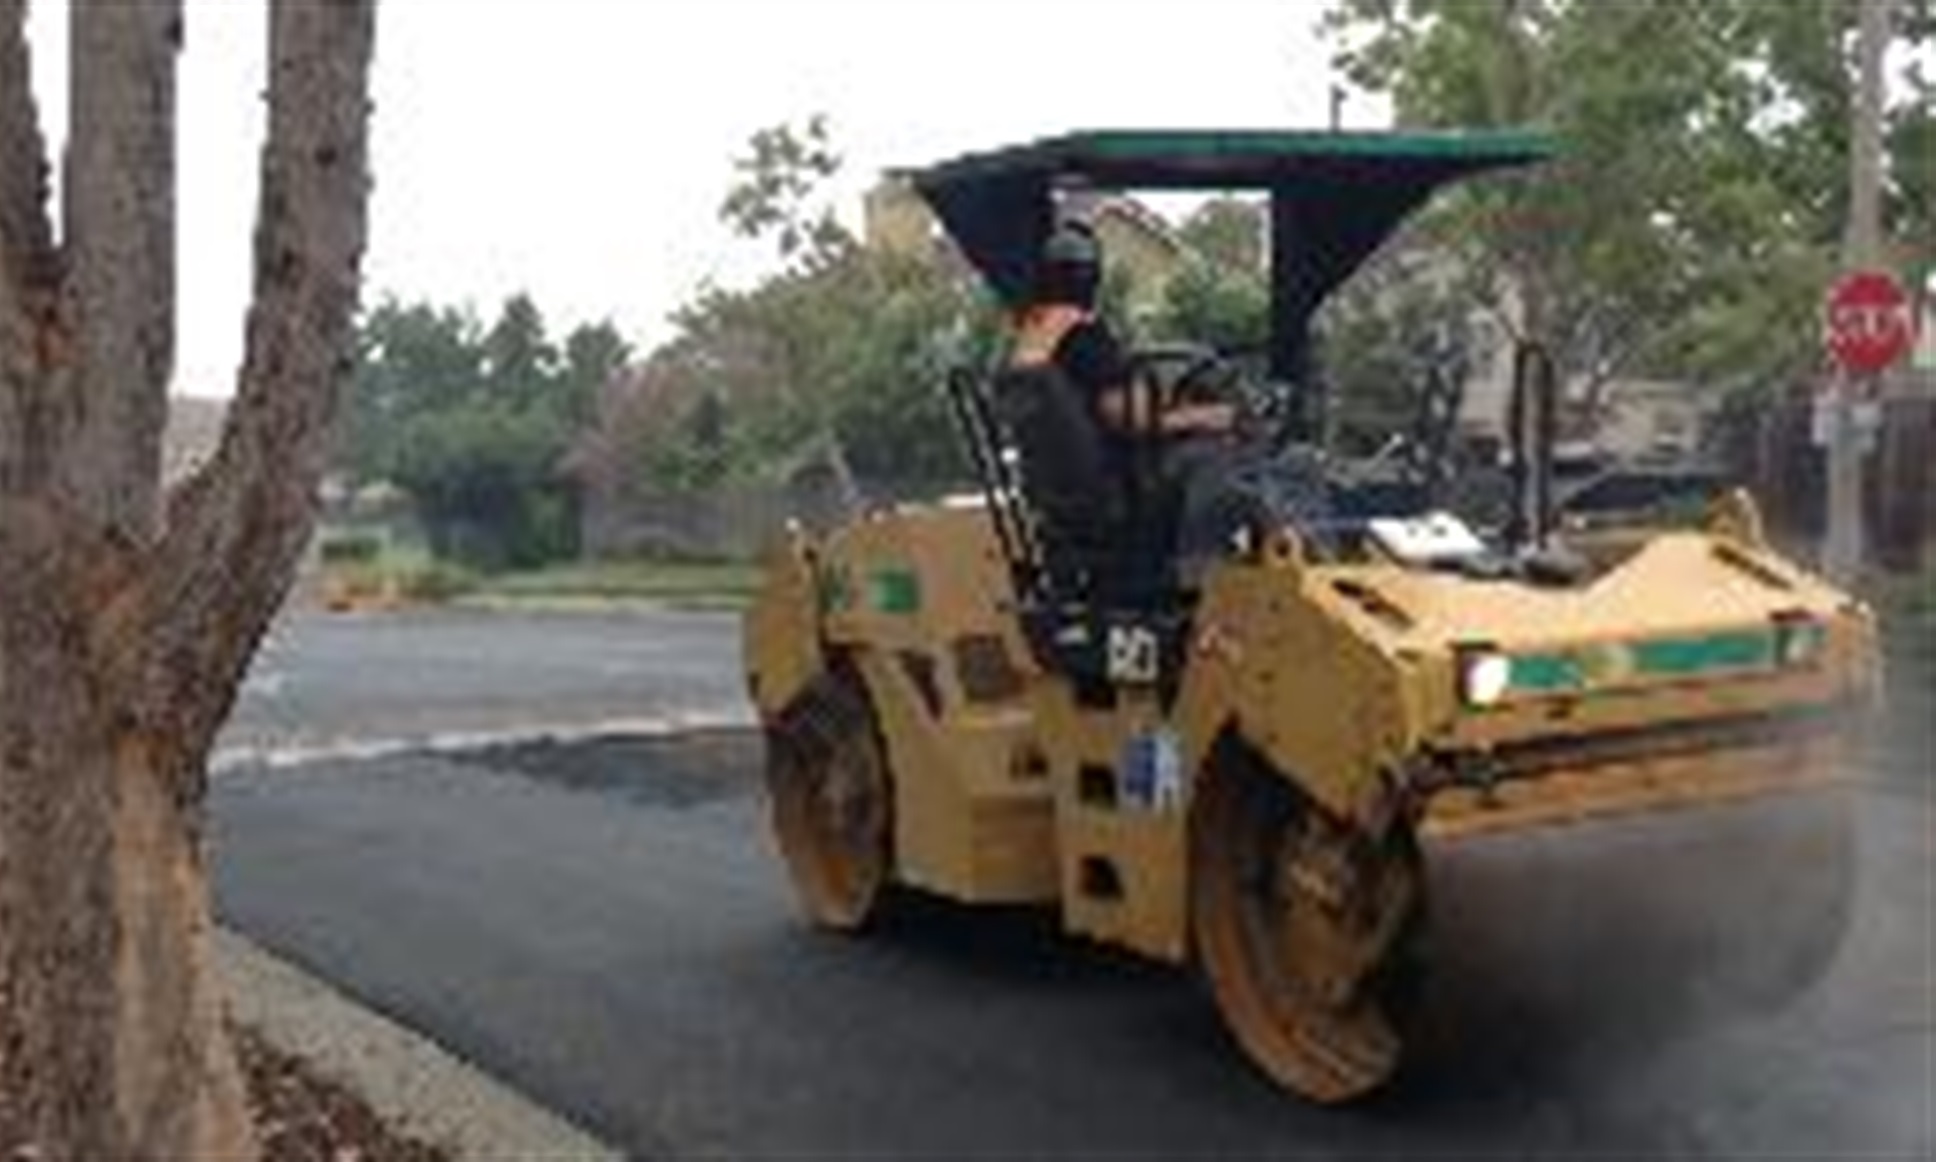 Construction crew smoothing new street pavement